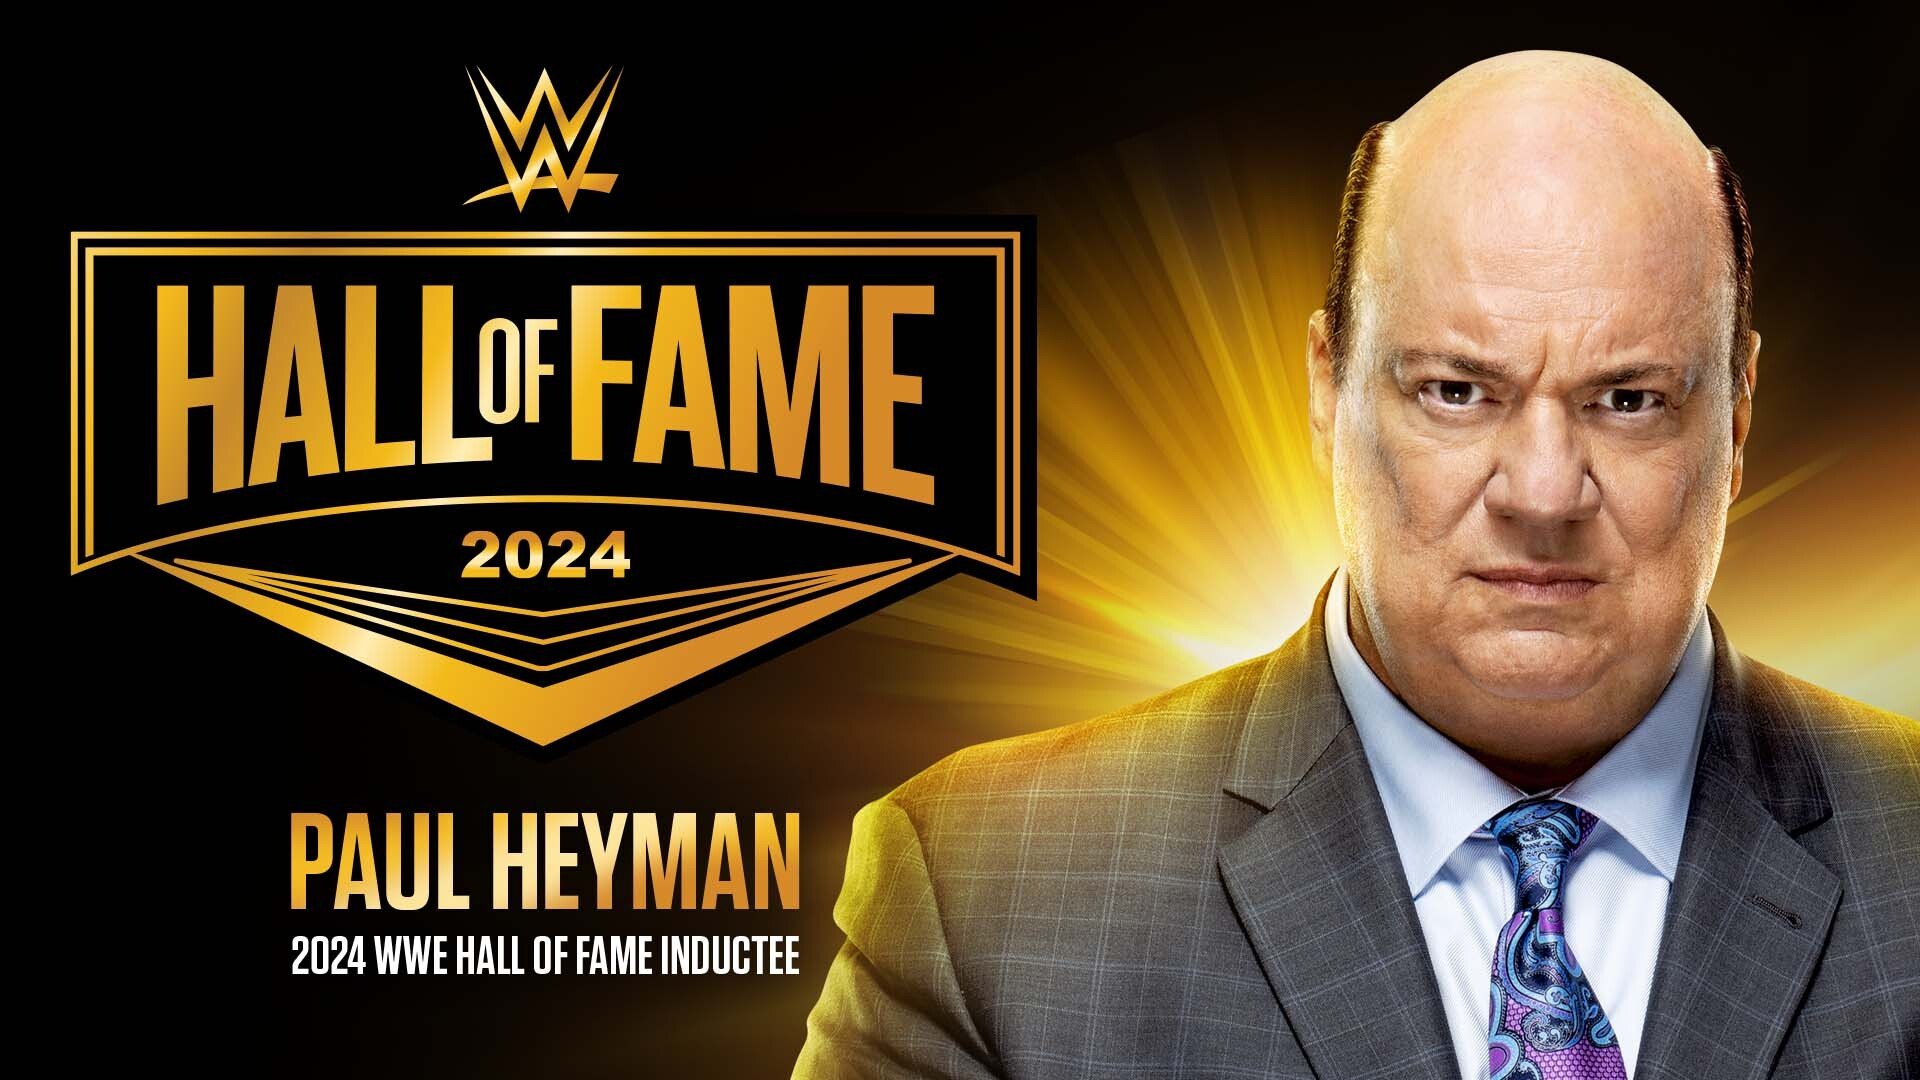 Booker T Suggests Tommy Dreamer as the Ideal Choice to Induct Paul Heyman into the WWE Hall of Fame